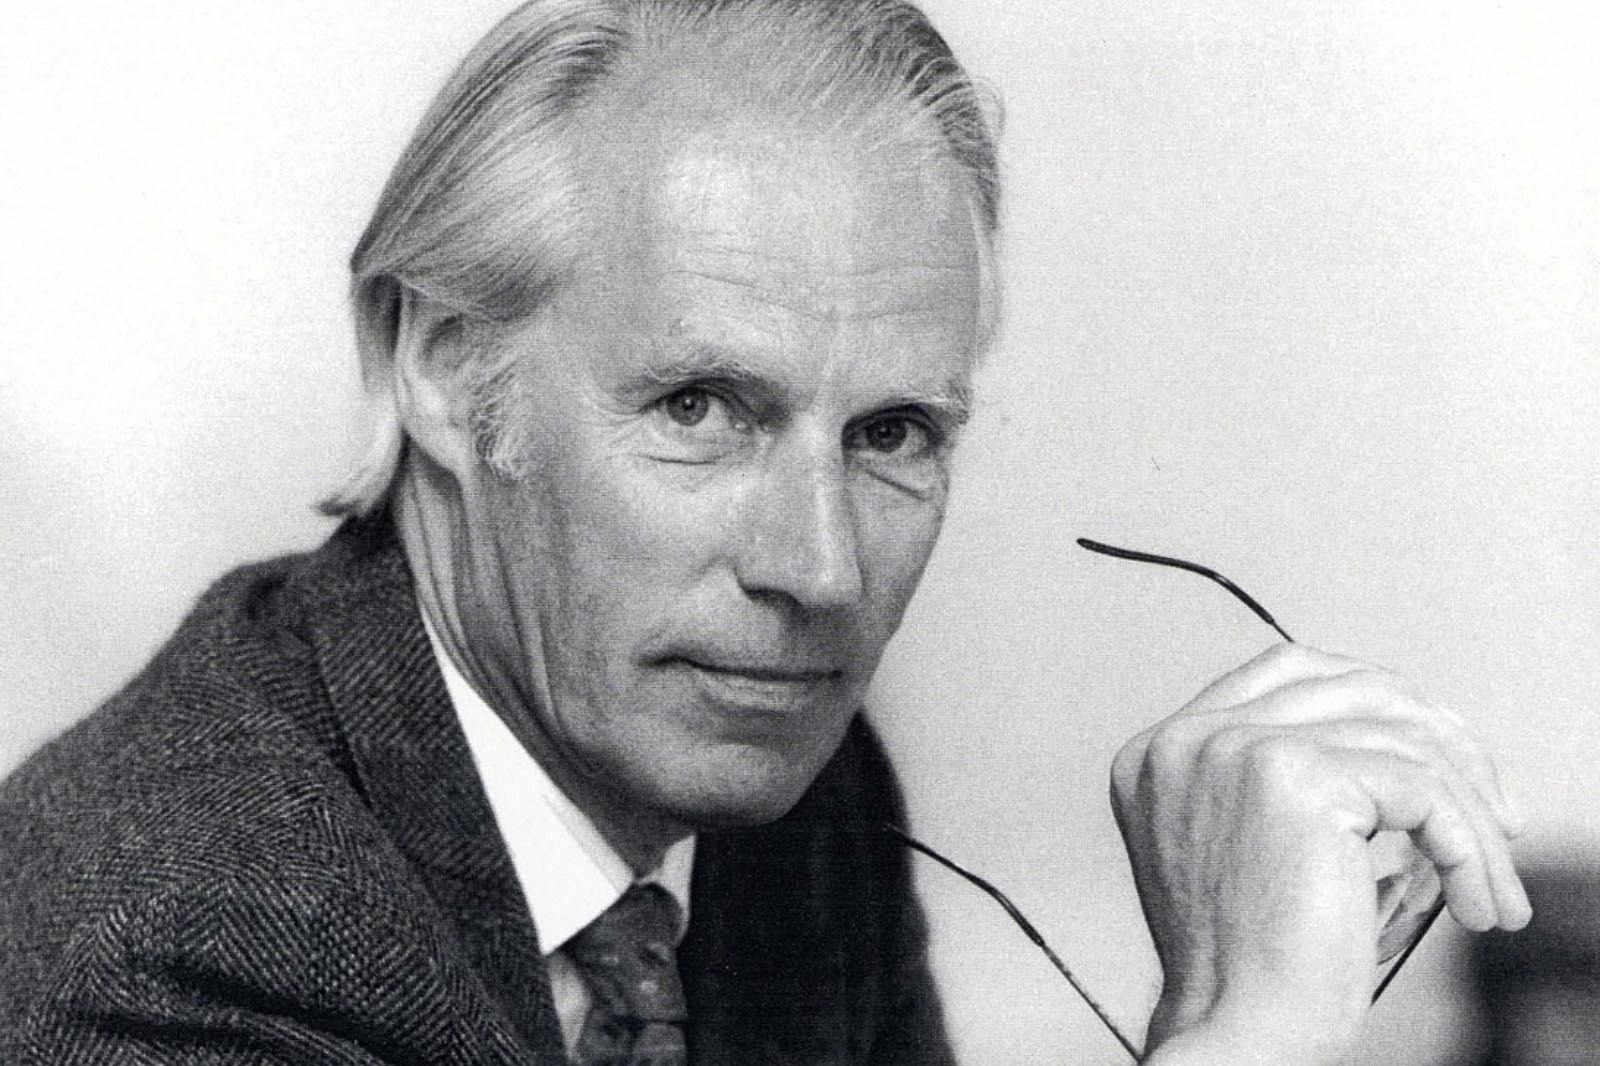 “Fifth Beatle” Sir George Martin has died